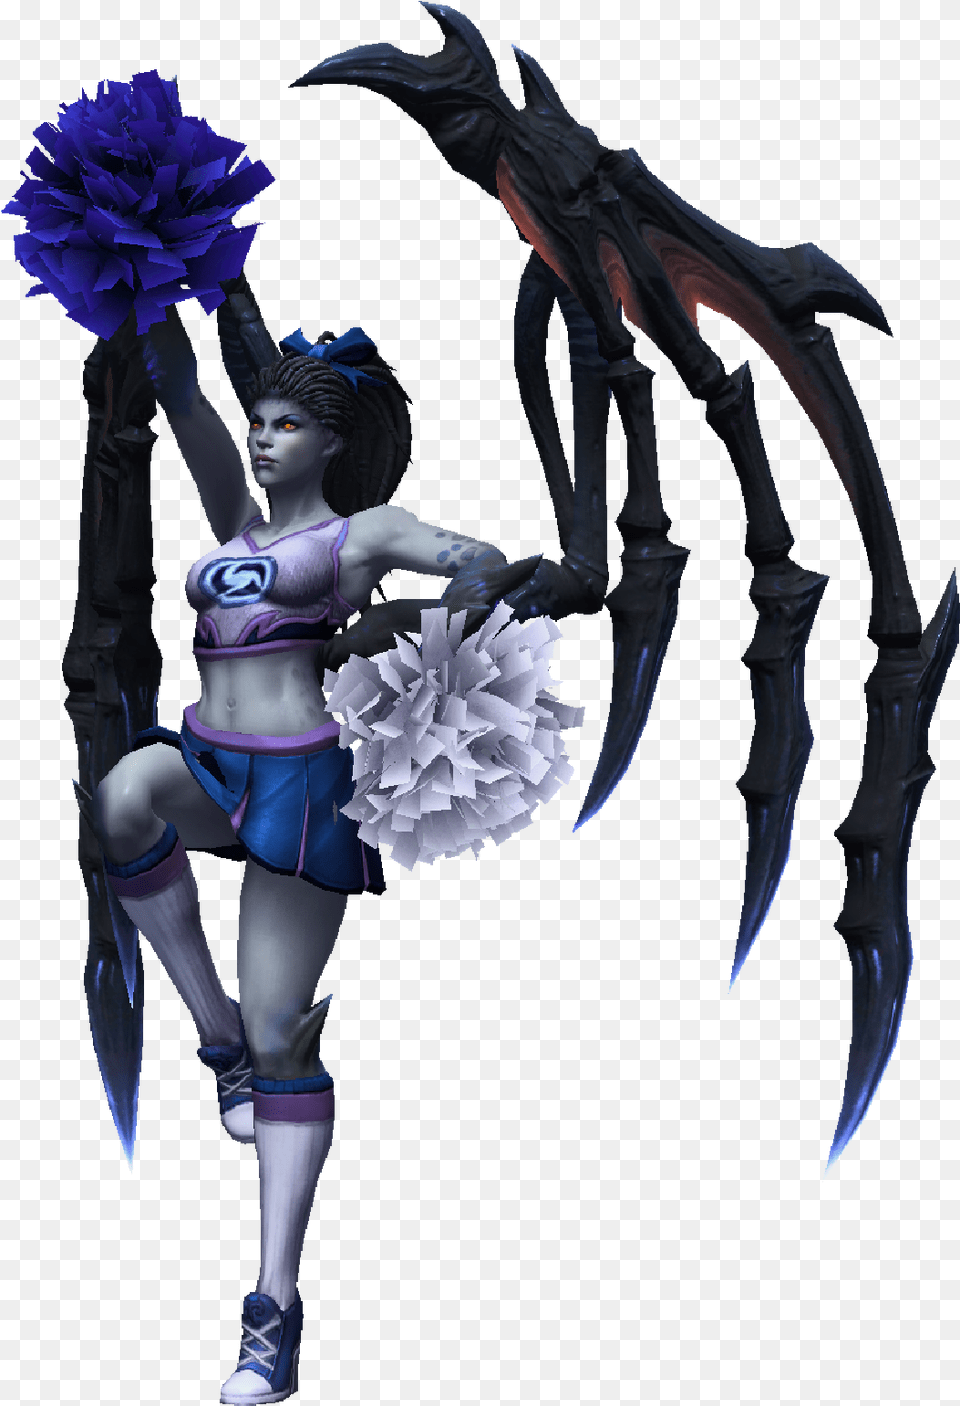 Kerrigan Cheerleader Champion Skin Stand Ready Illustration, Adult, Person, Female, Woman Png Image